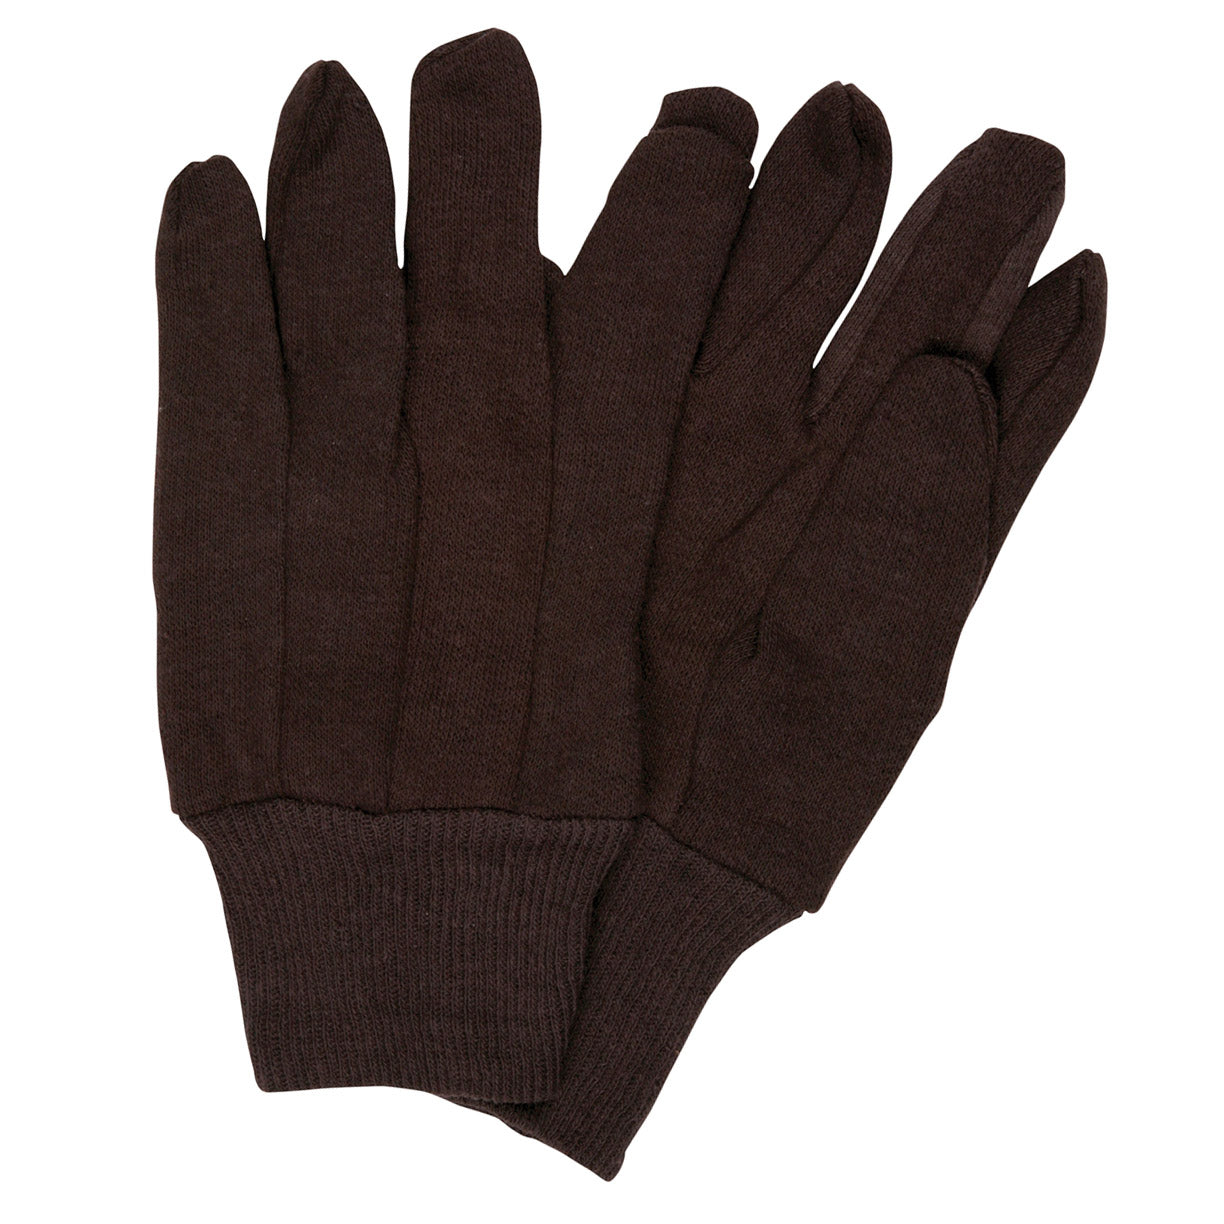 100% Cotton Jersey Gloves (Box of 12), 7100P